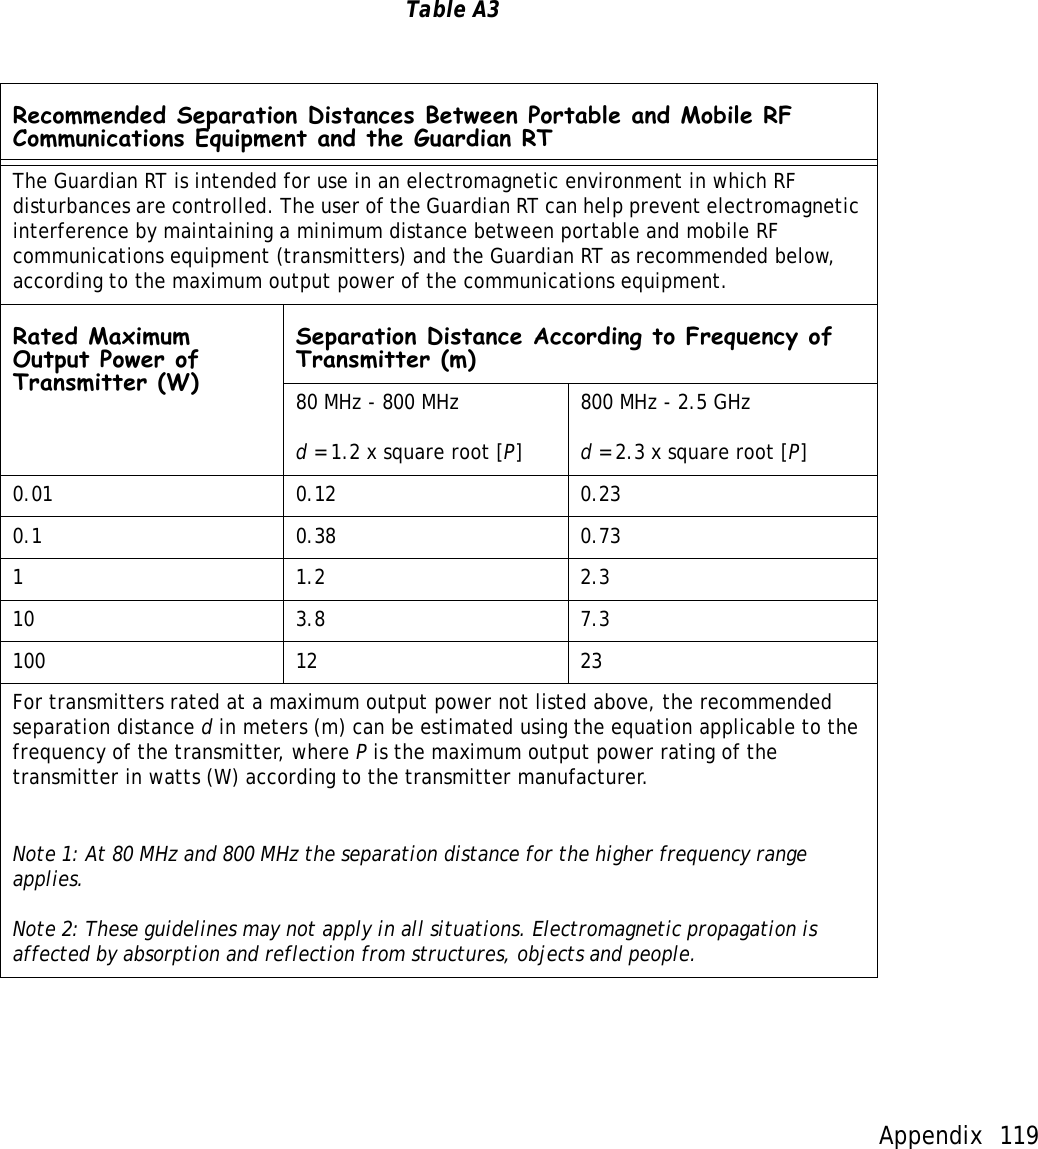 Appendix 119  Table A3Recommended Separation Distances Between Portable and Mobile RF Communications Equipment and the Guardian RTThe Guardian RT is intended for use in an electromagnetic environment in which RF disturbances are controlled. The user of the Guardian RT can help prevent electromagnetic interference by maintaining a minimum distance between portable and mobile RF communications equipment (transmitters) and the Guardian RT as recommended below, according to the maximum output power of the communications equipment.Rated Maximum Output Power of Transmitter (W)Separation Distance According to Frequency of Transmitter (m)80 MHz - 800 MHzd = 1.2 x square root [P]800 MHz - 2.5 GHzd = 2.3 x square root [P] 0.01 0.12 0.230.1 0.38 0.7311.22.310 3.8 7.3100 12 23For transmitters rated at a maximum output power not listed above, the recommended separation distance d in meters (m) can be estimated using the equation applicable to the frequency of the transmitter, where P is the maximum output power rating of the transmitter in watts (W) according to the transmitter manufacturer. Note 1: At 80 MHz and 800 MHz the separation distance for the higher frequency range applies.Note 2: These guidelines may not apply in all situations. Electromagnetic propagation is affected by absorption and reflection from structures, objects and people.